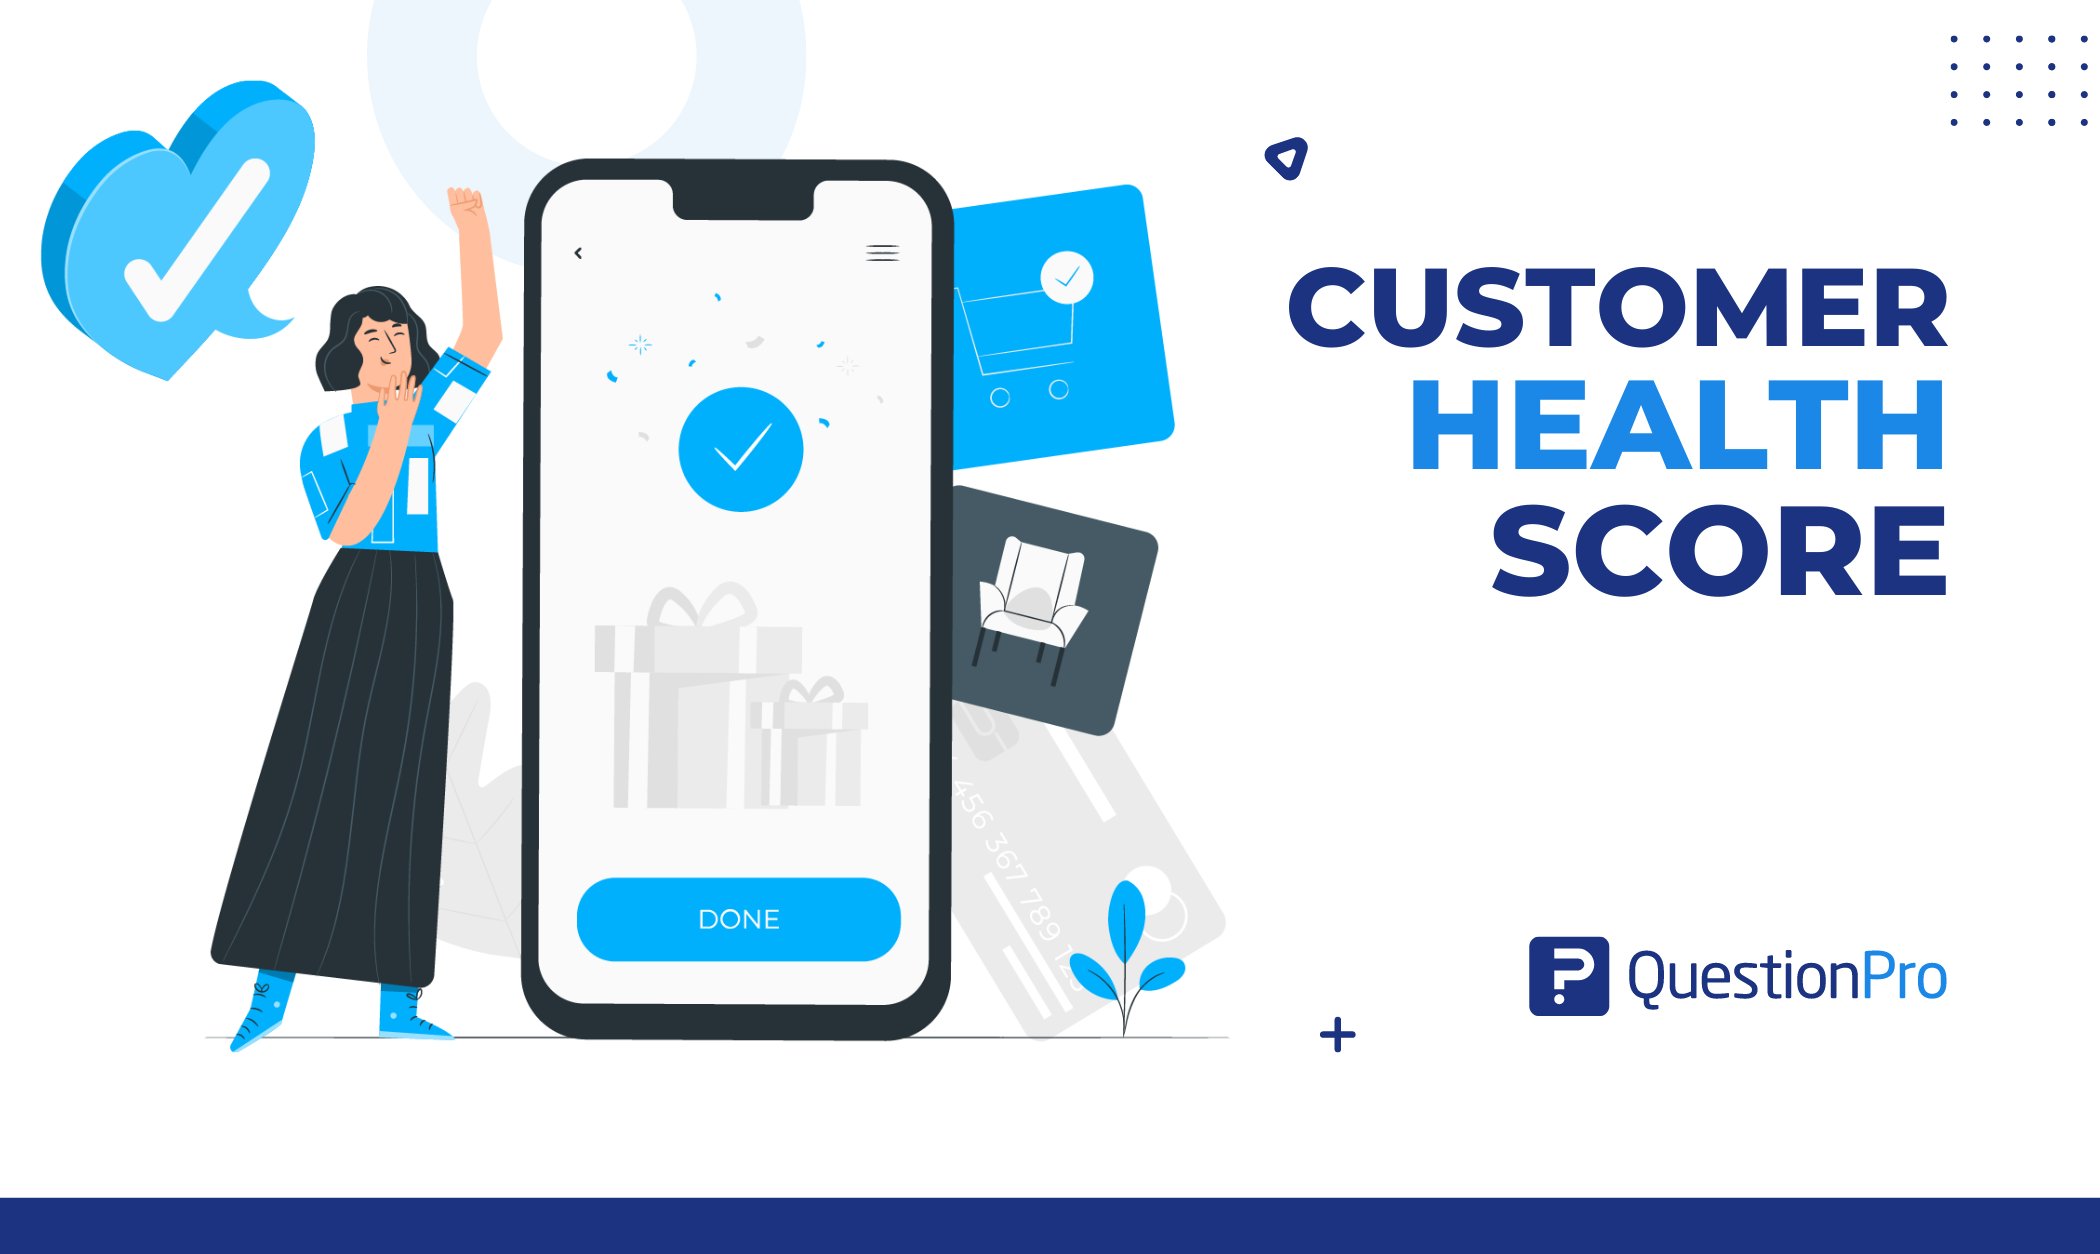 Discover what is the customer health score and learn measurement techniques in this concise guide. Optimize customer success today!